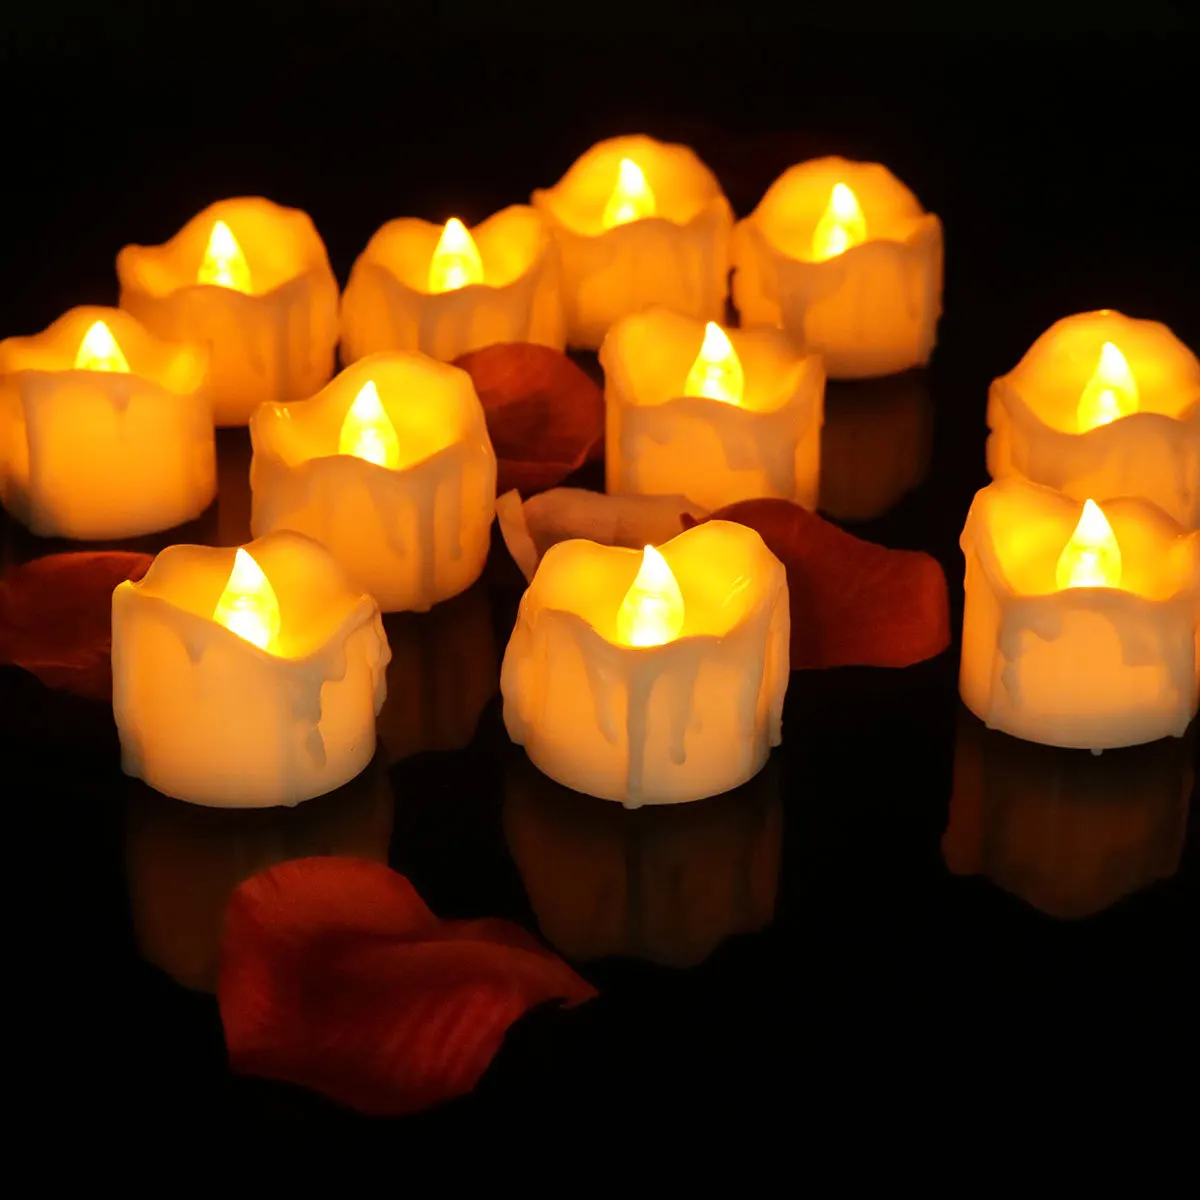 Timer led  Candles, 12pcs  Battery Operated LED Decorative Flameless Candles Flickering Tea Light, 6 Hours On and 18 Hours Off